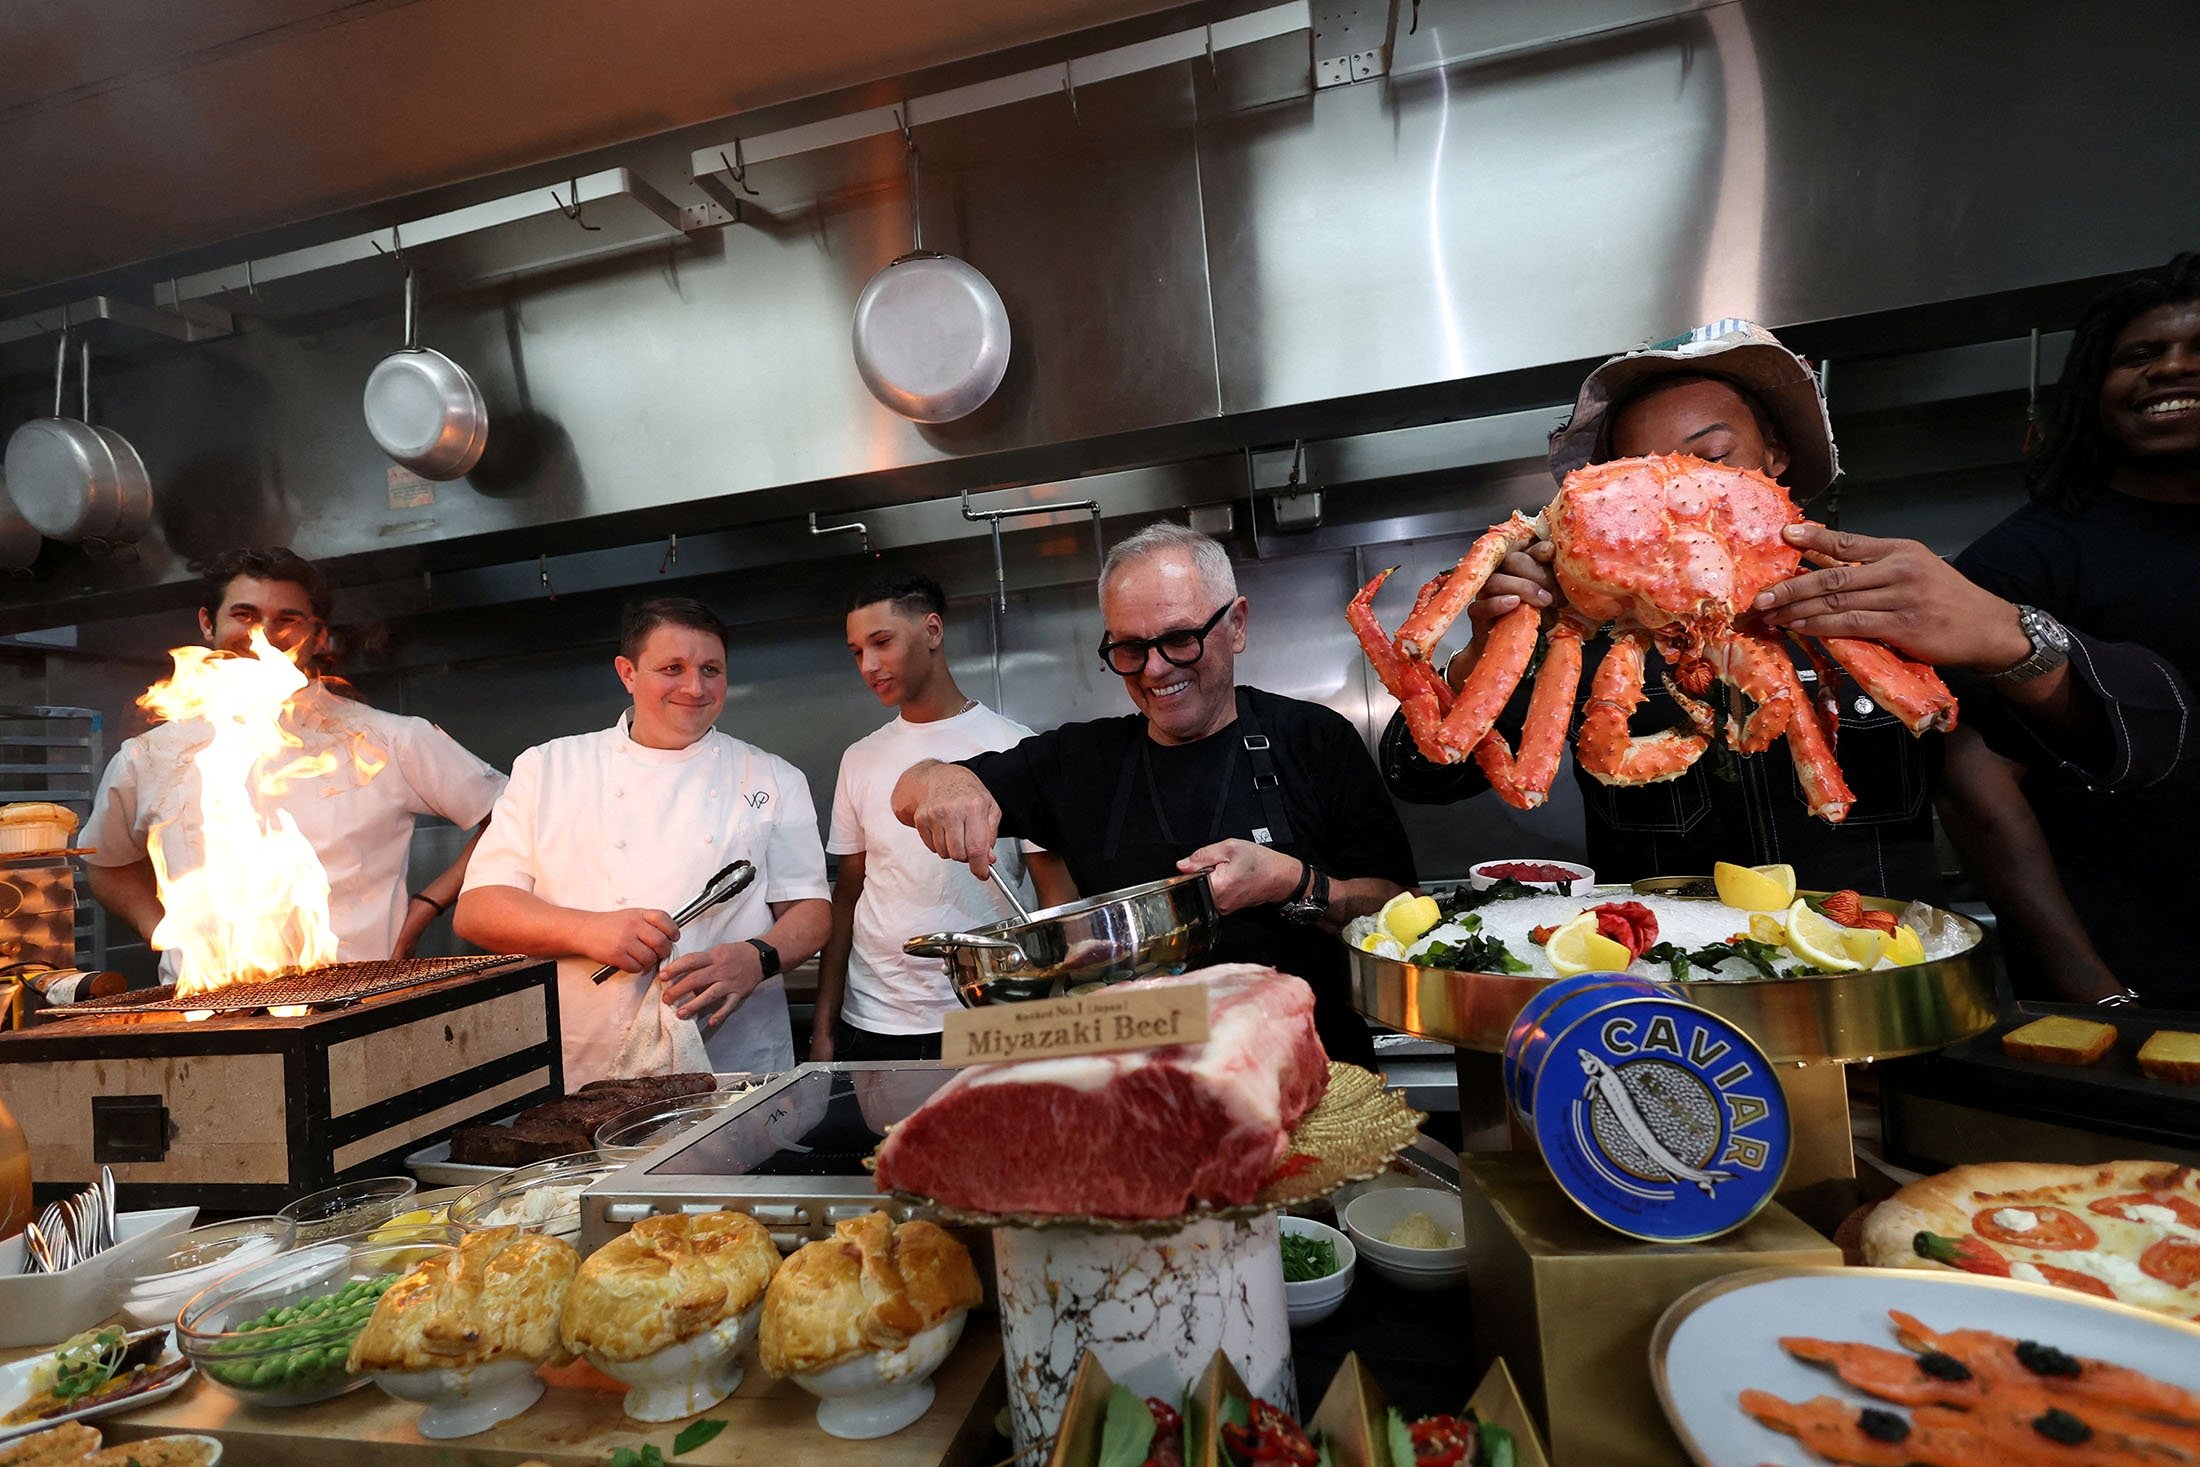 Chef Wolfgang Puck (C-R) and his team, including the chefs behind the cooking collective 